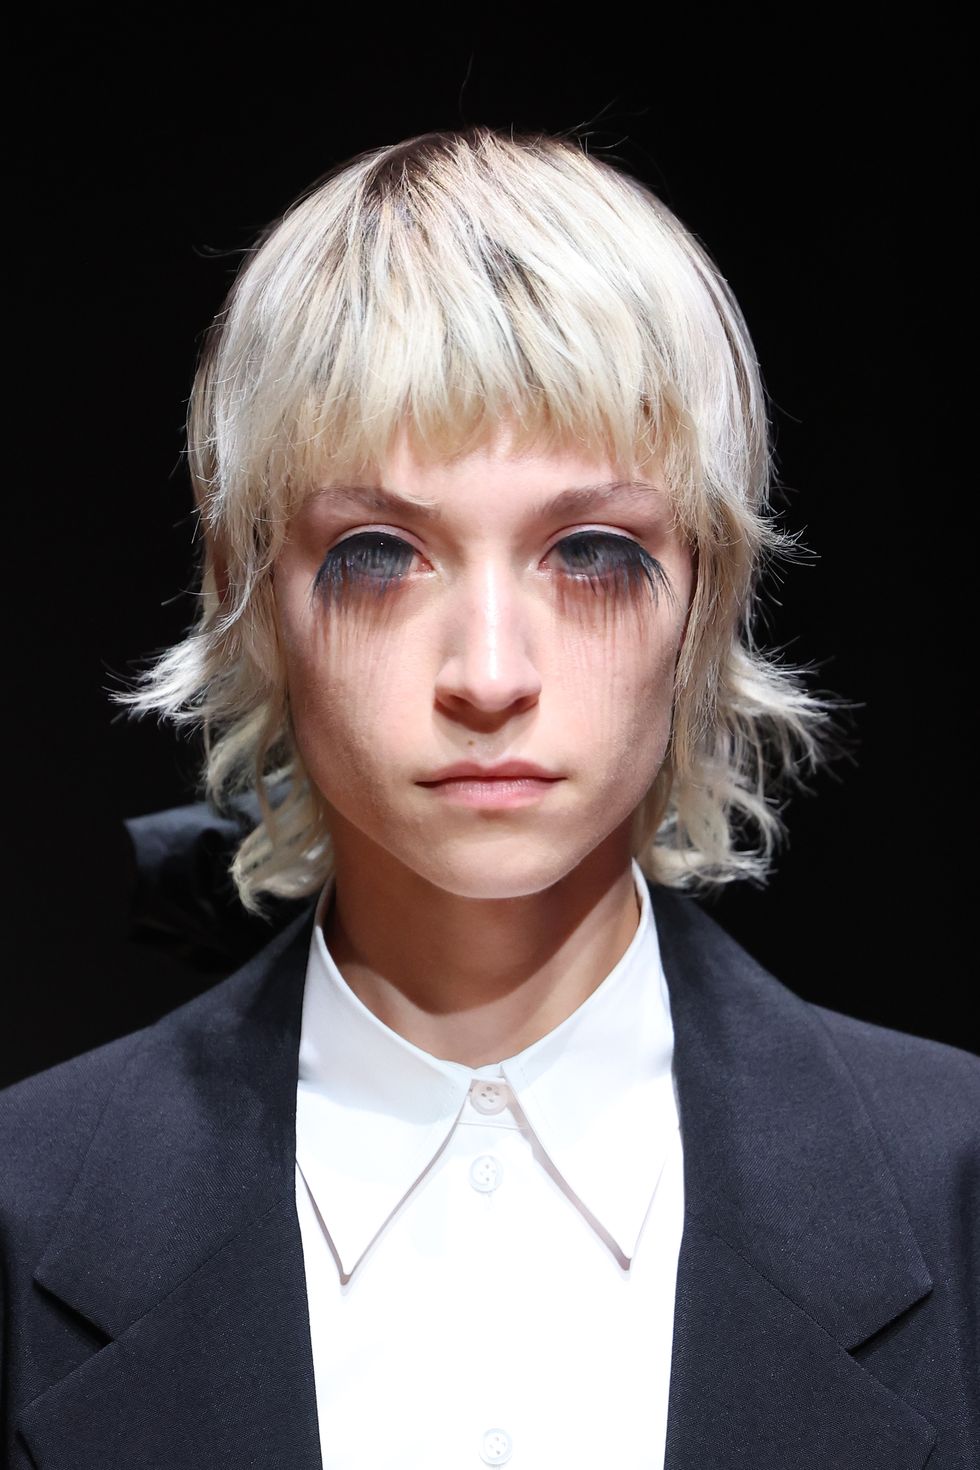 A Record Number of Trans and Nonbinary Models Debut at Prada